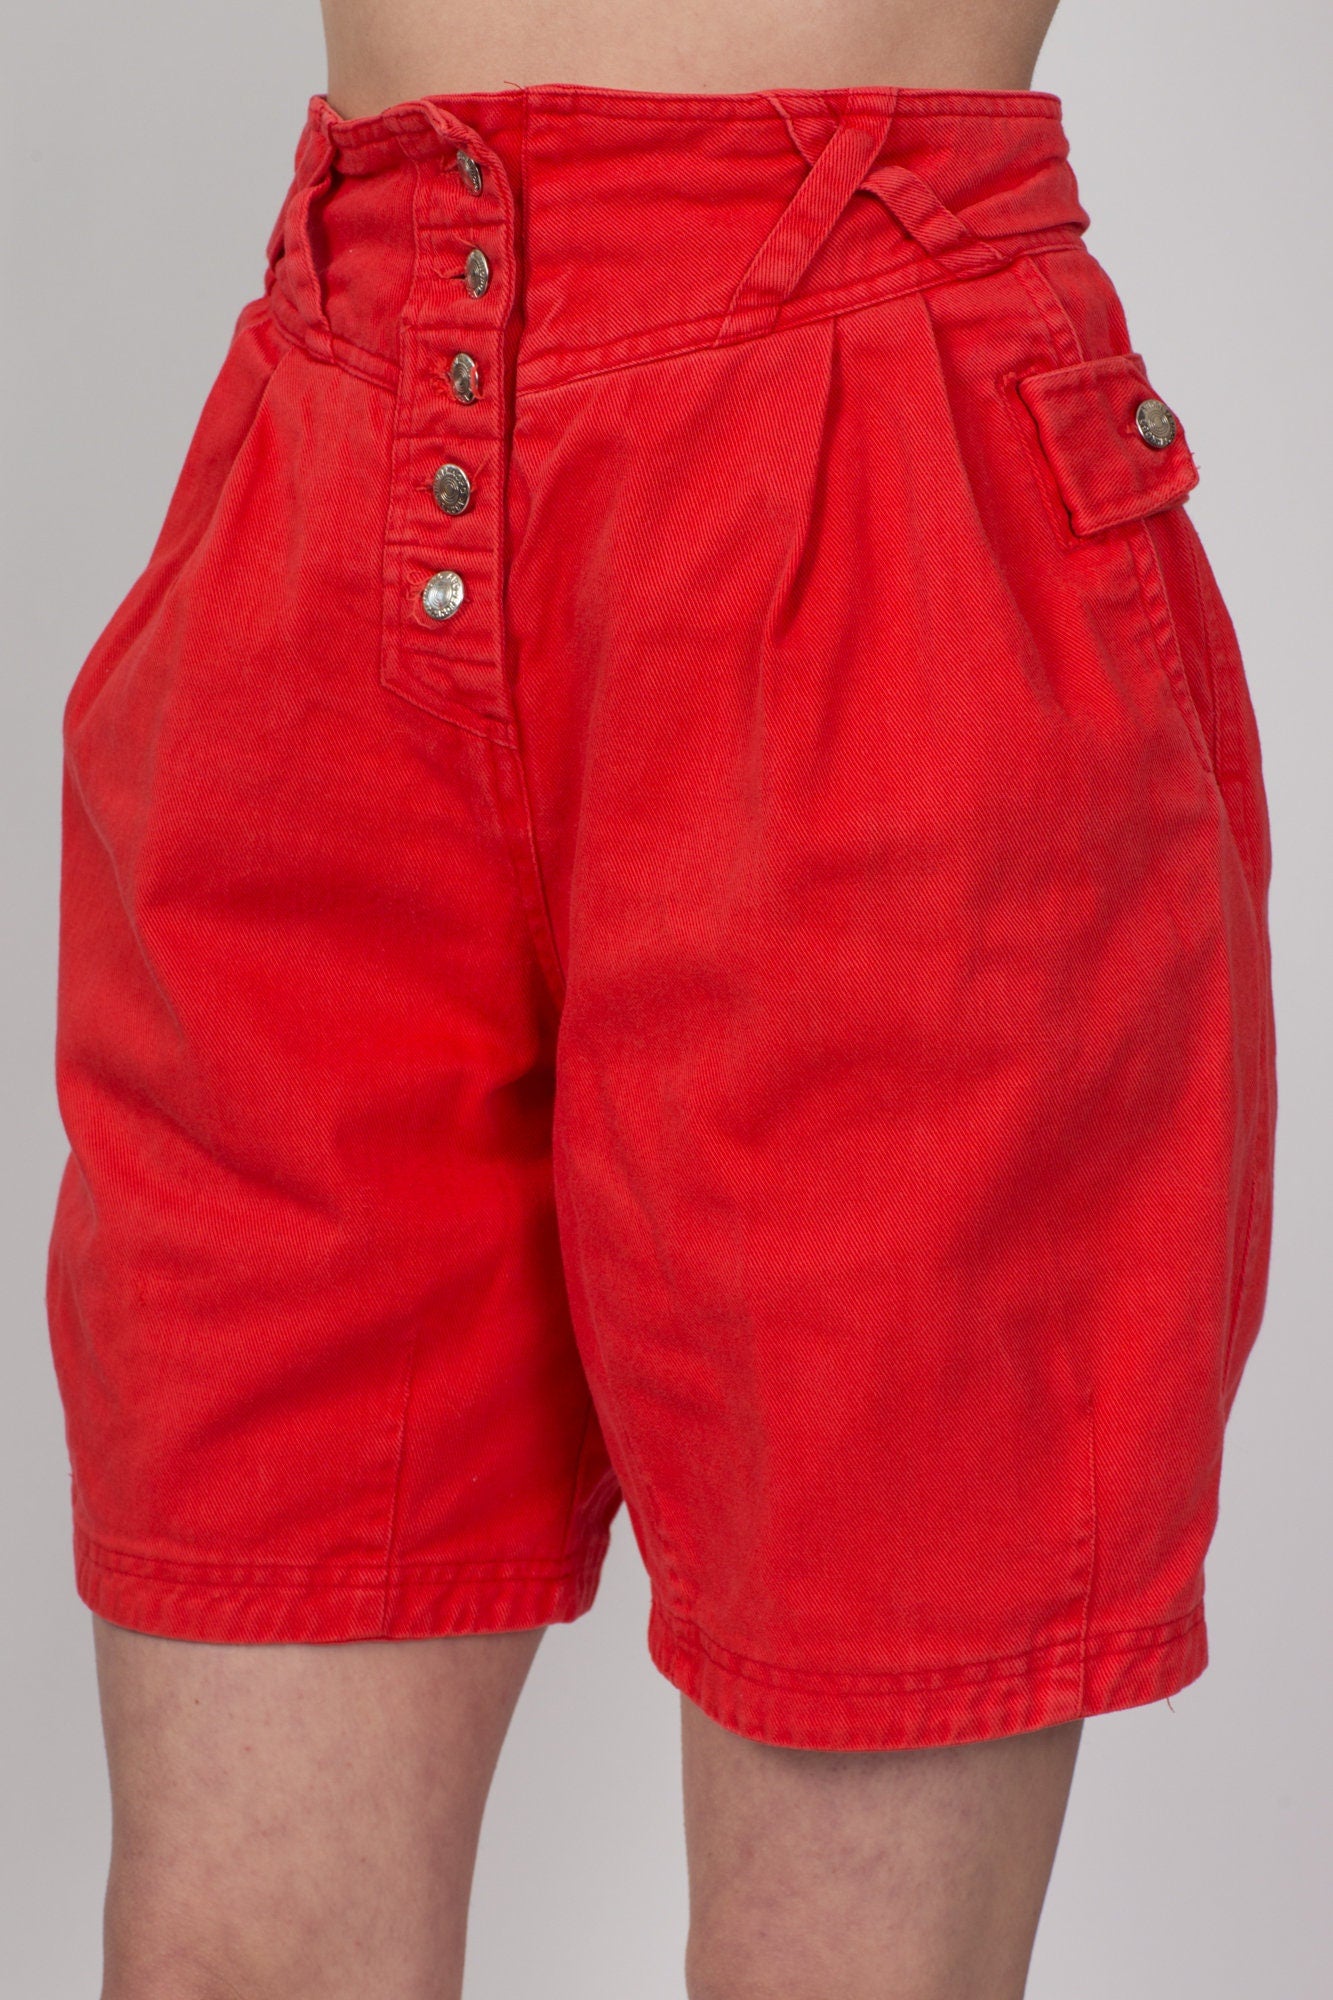 80s 90s Red Pleated Cotton Shorts - Small, 27" 